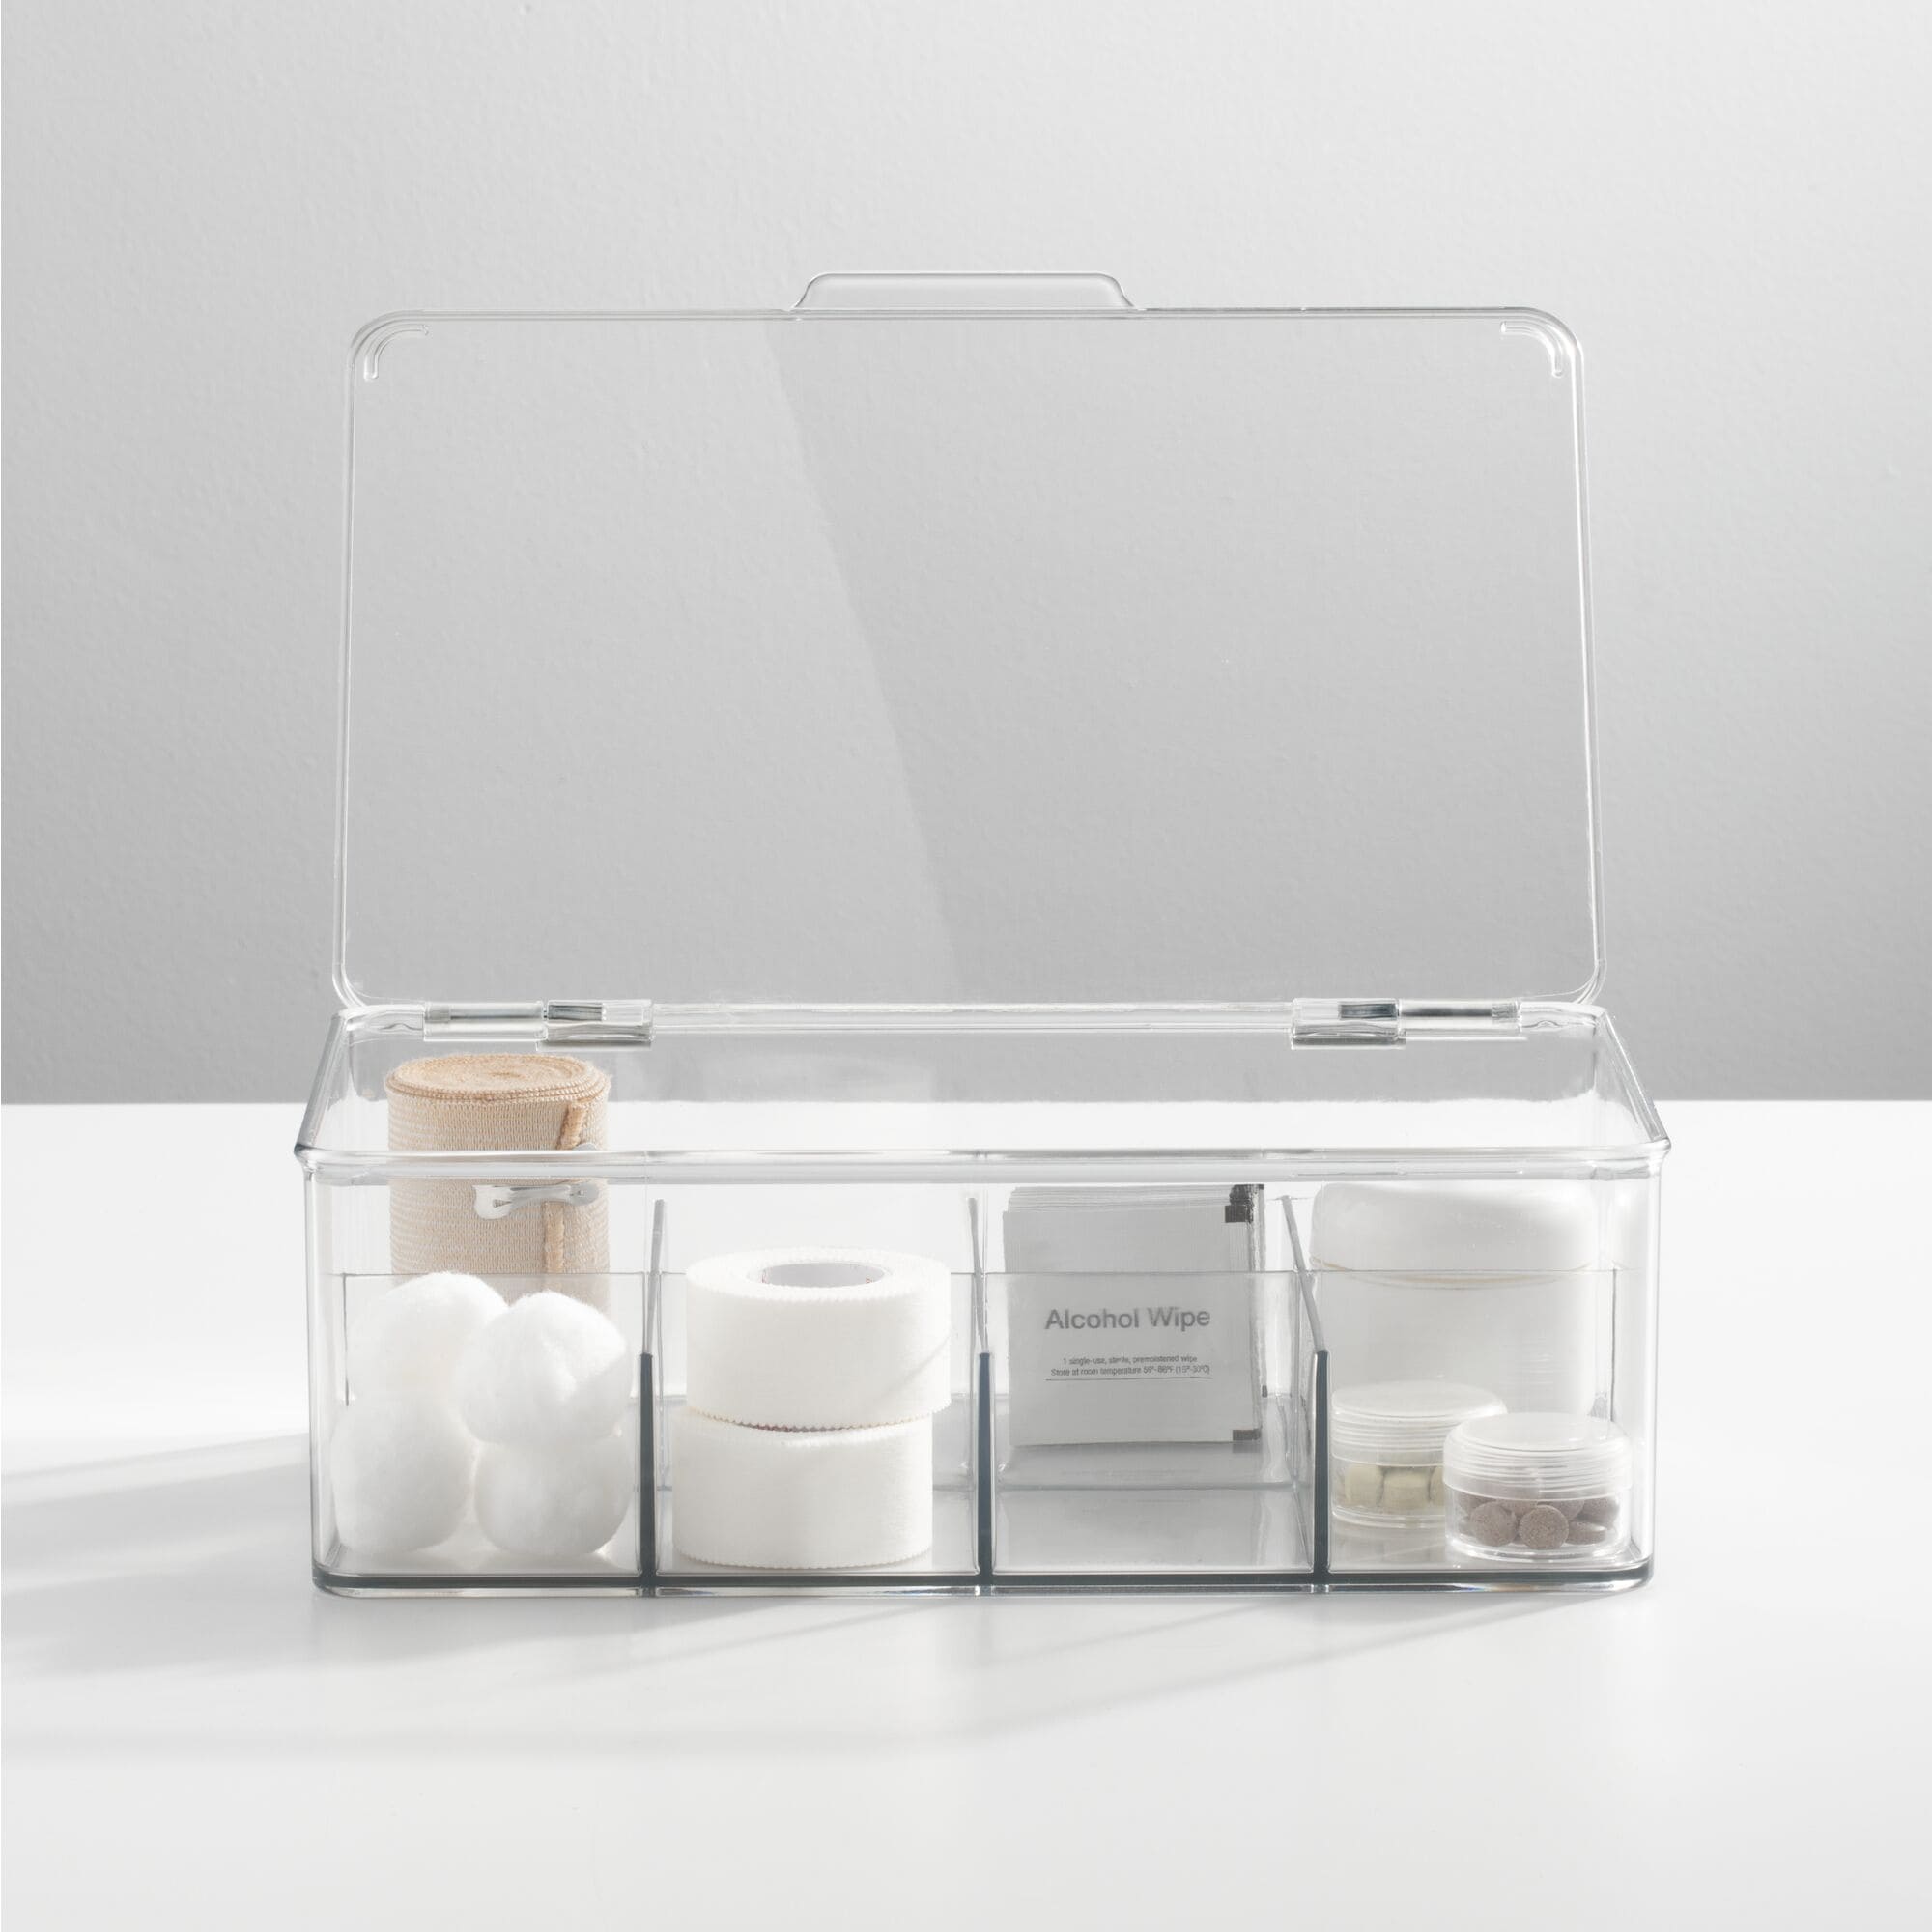 mDesign Plastic Divided First Aid Storage Box Kit with Hinge Lid - Clear -  Bed Bath & Beyond - 39551722